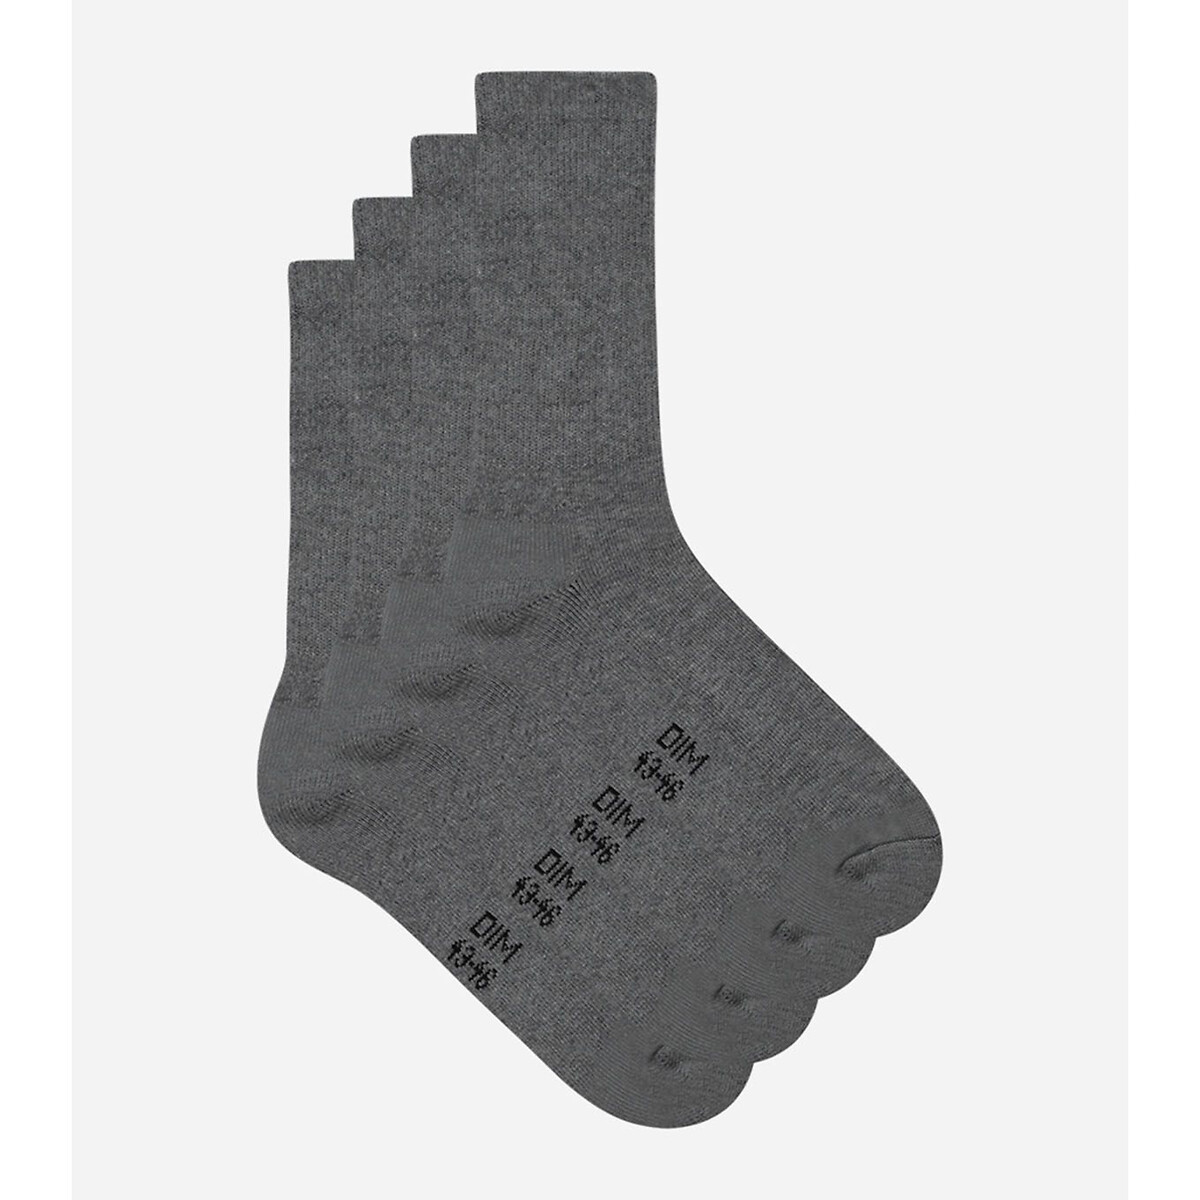 Image of Pack of 2 Pairs of Outdoor Socks in Cotton Mix